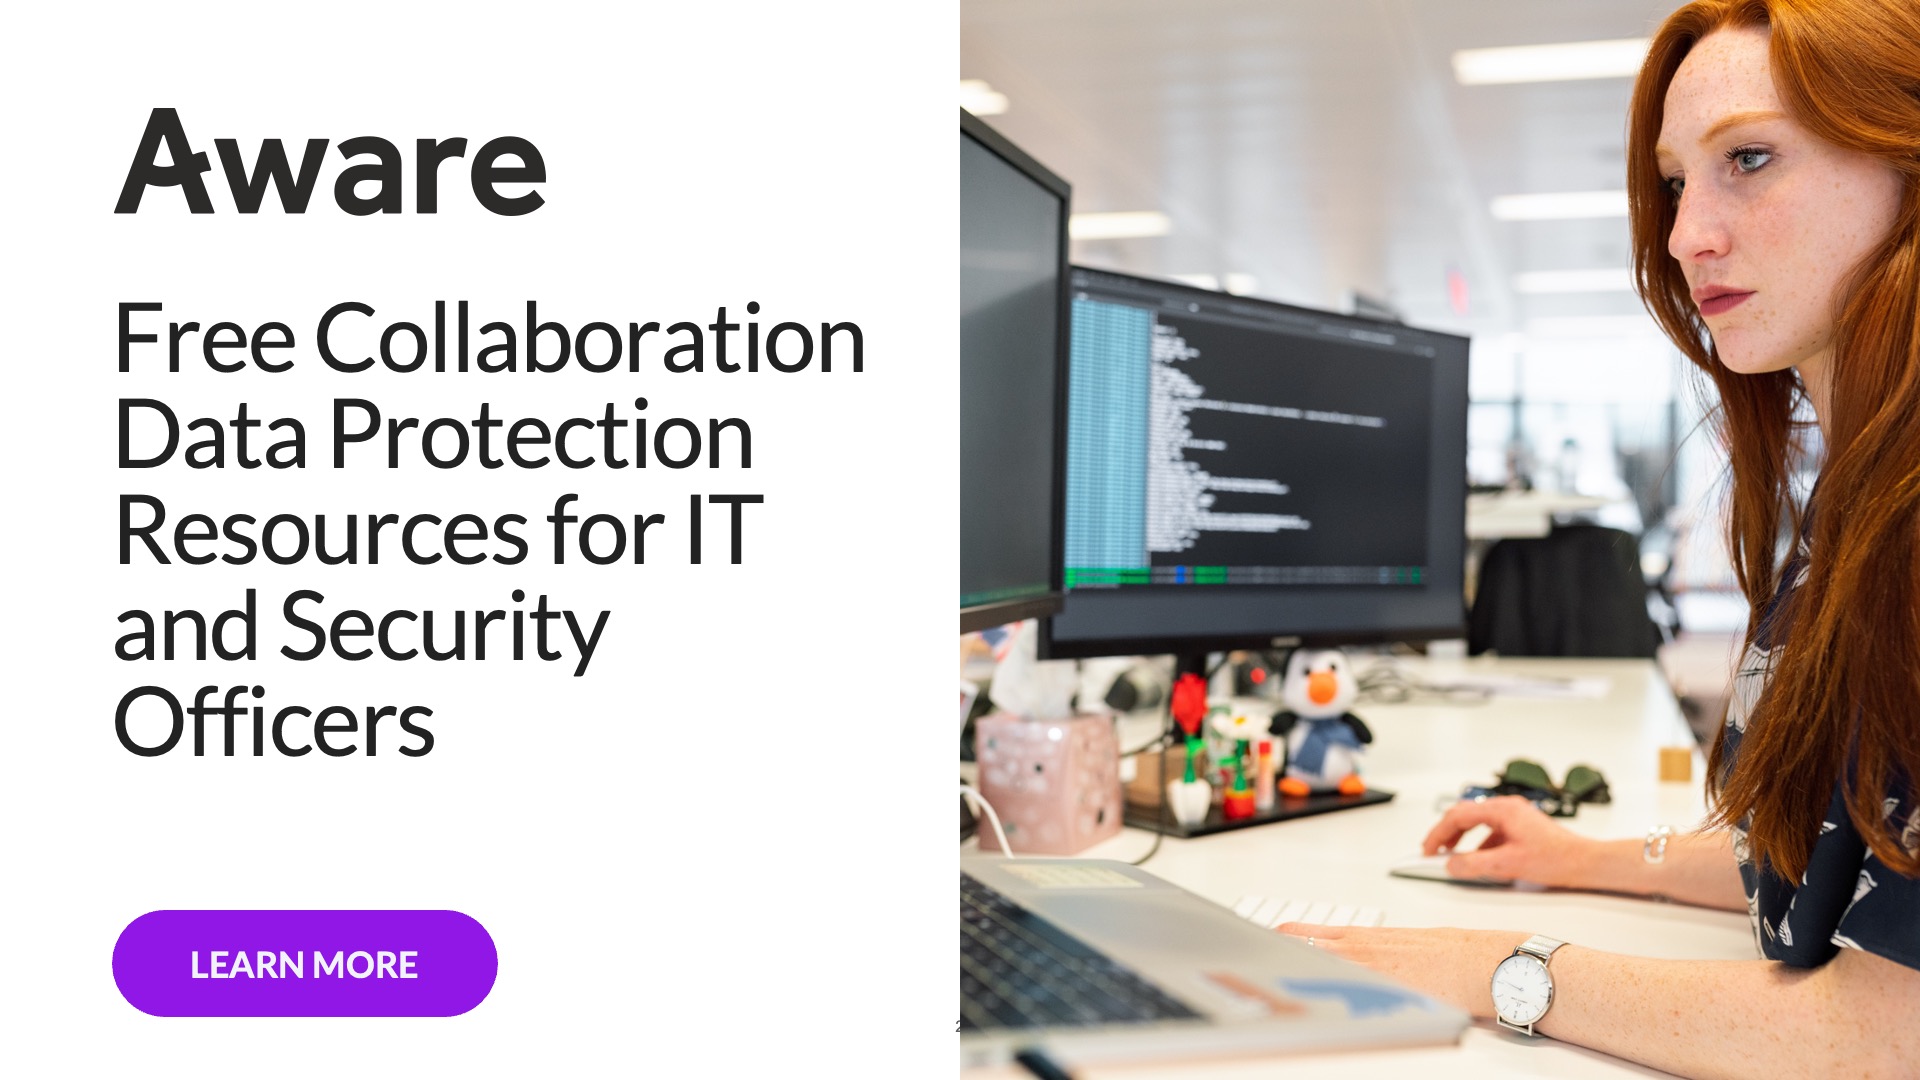 Free Collaboration Data Protection Resources for IT and Security Officers